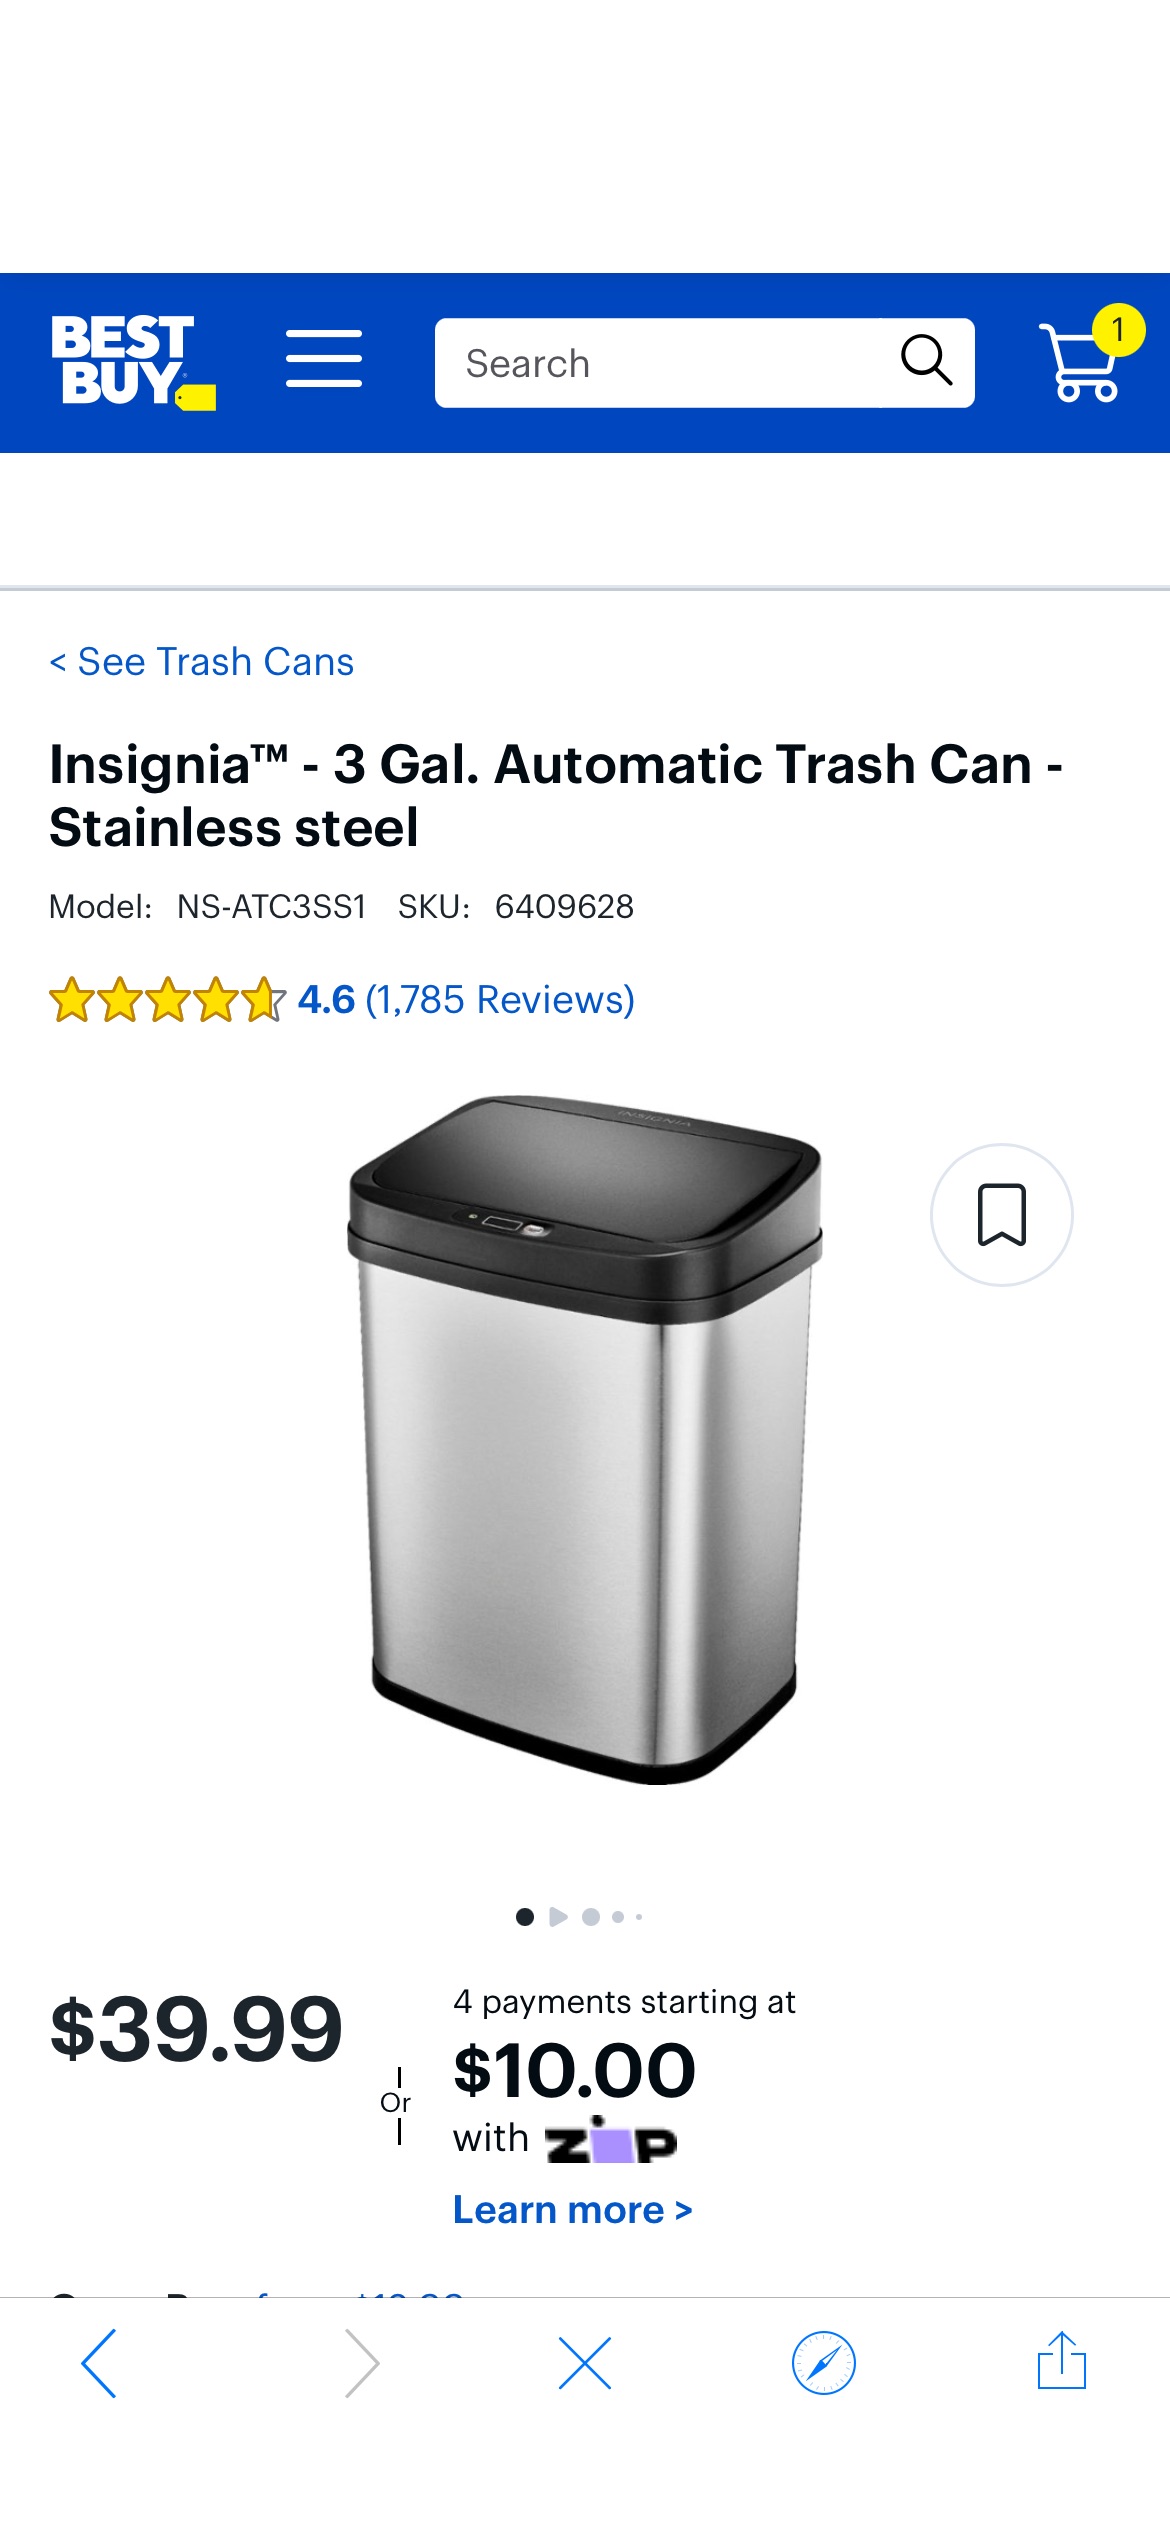 Insignia™ 3 Gal. Automatic Trash Can Stainless steel NS-ATC3SS1 - Best Buy